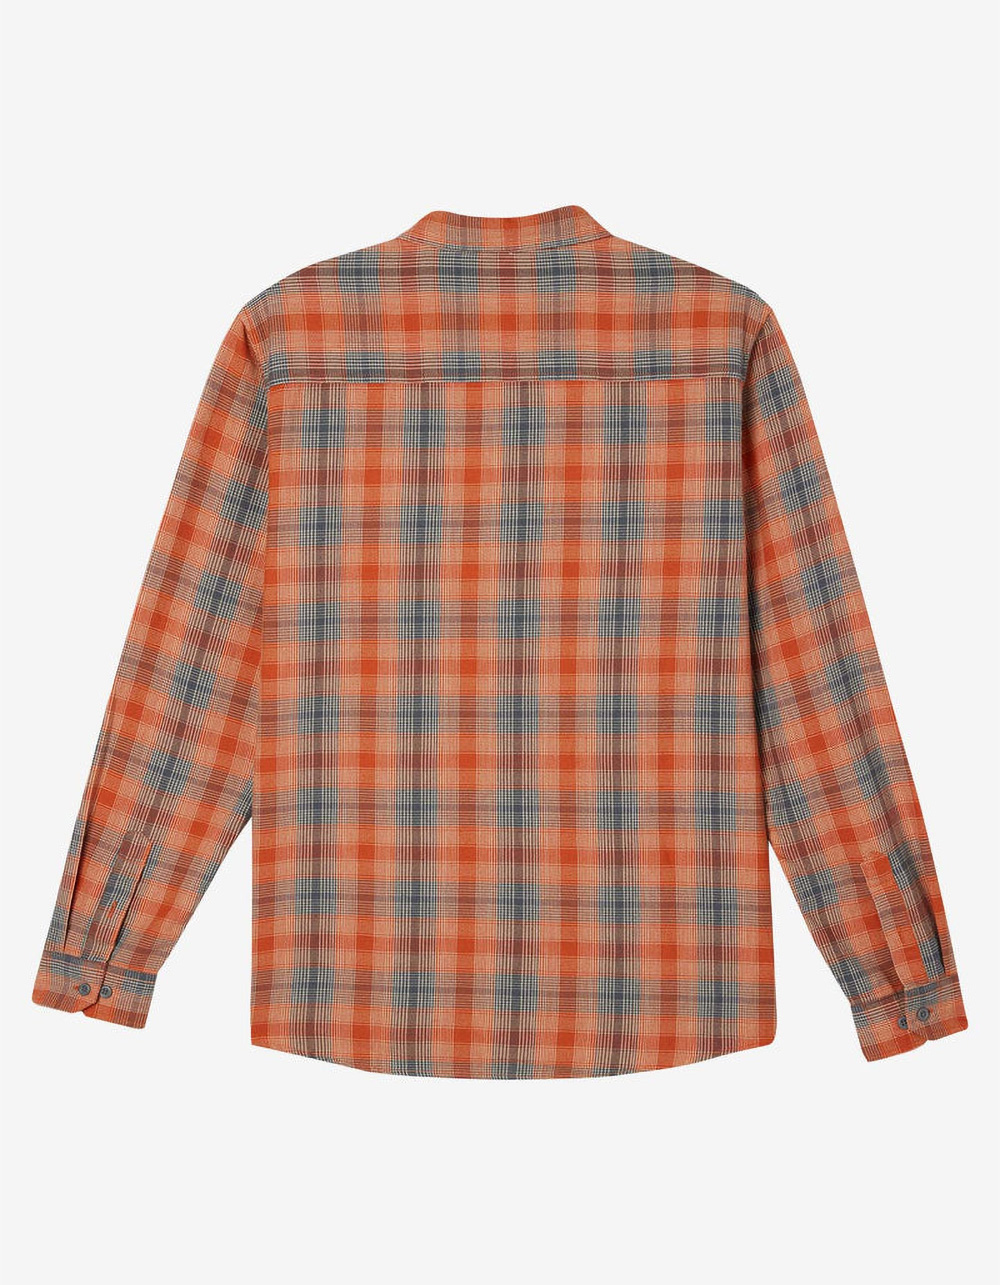 O'NEILL Prospect Mens Flannel - CLAY | Tillys